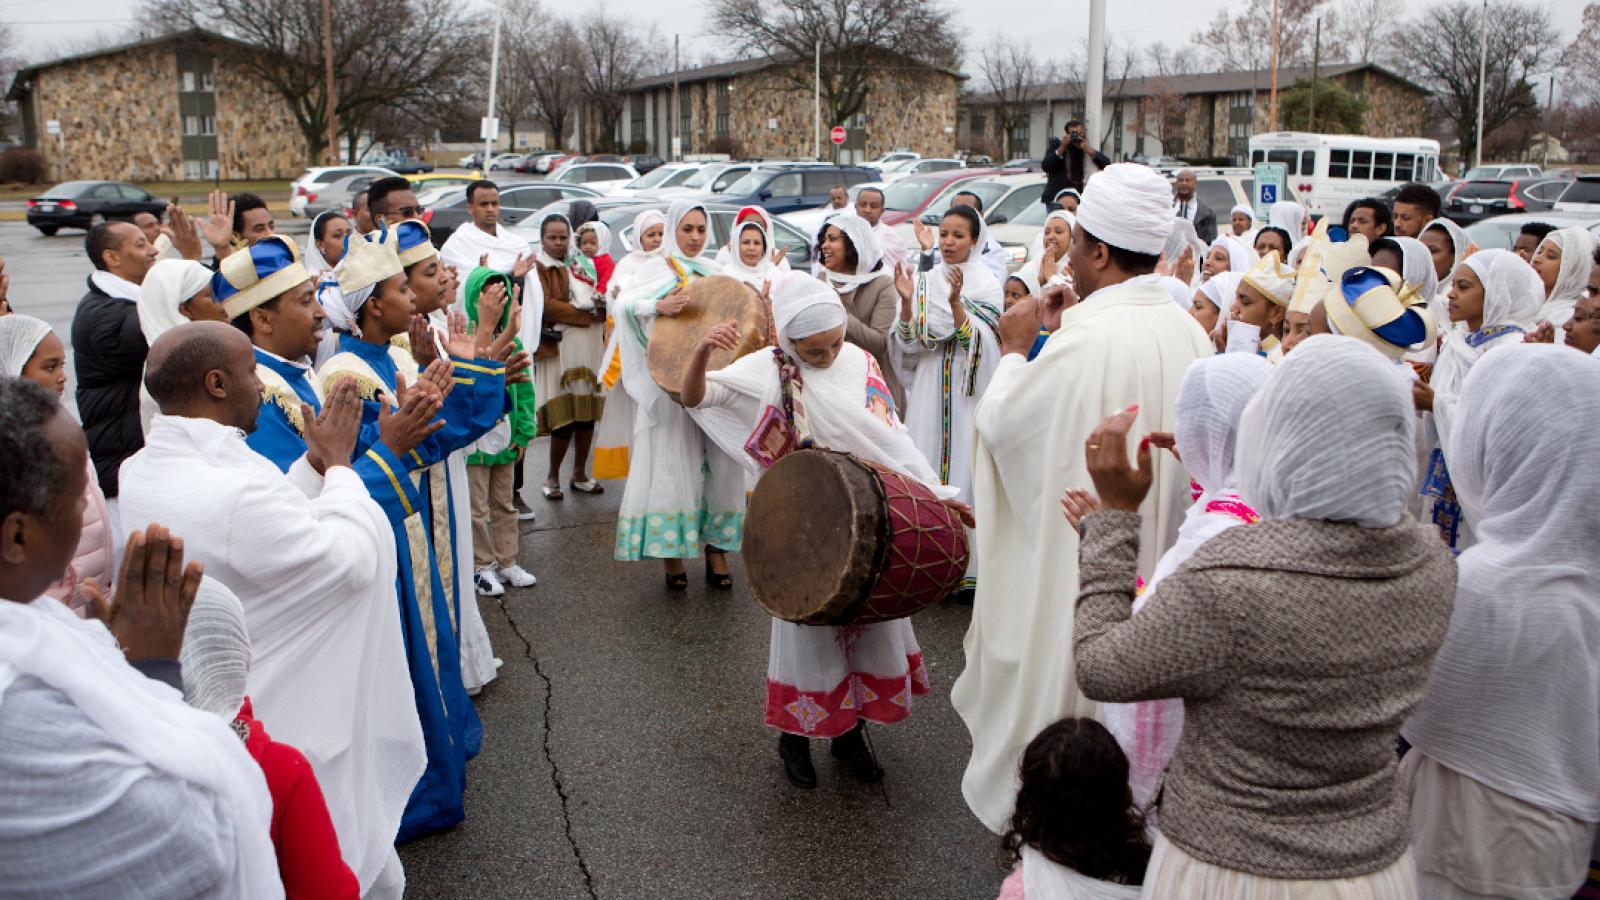 A girl plays an animal skin drum in a parking lot, surrounded by dozens of people wearing white robes